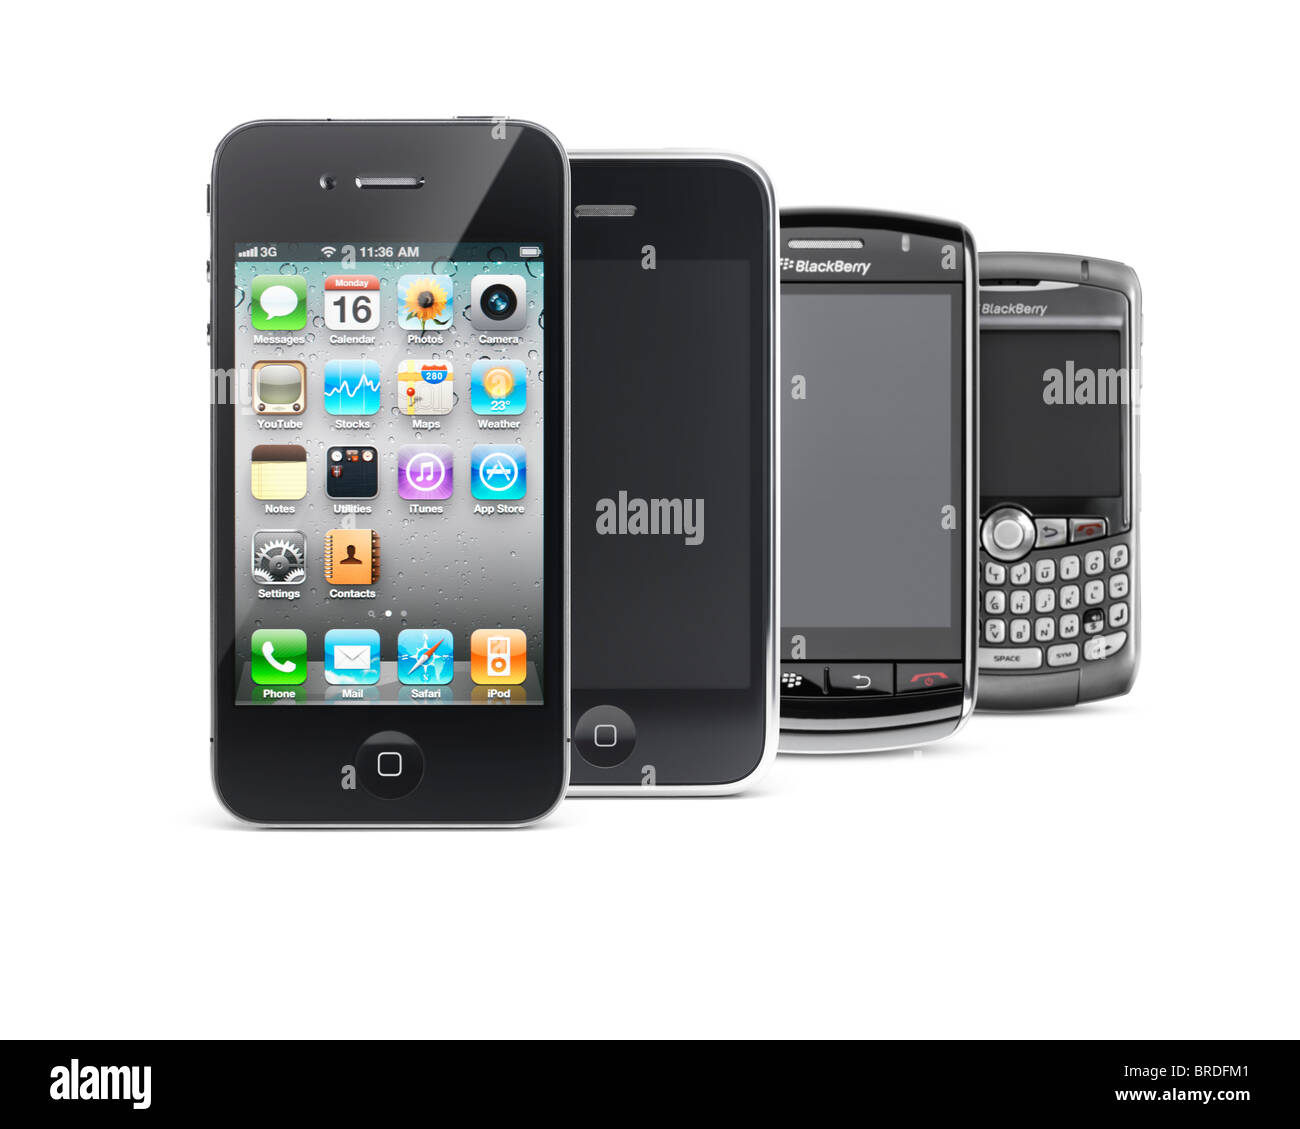 Four smartphones isolated on white background. Apple iPhone 4, iPhone 3G, Blackberry Storm and Blackberry Curve. Stock Photo